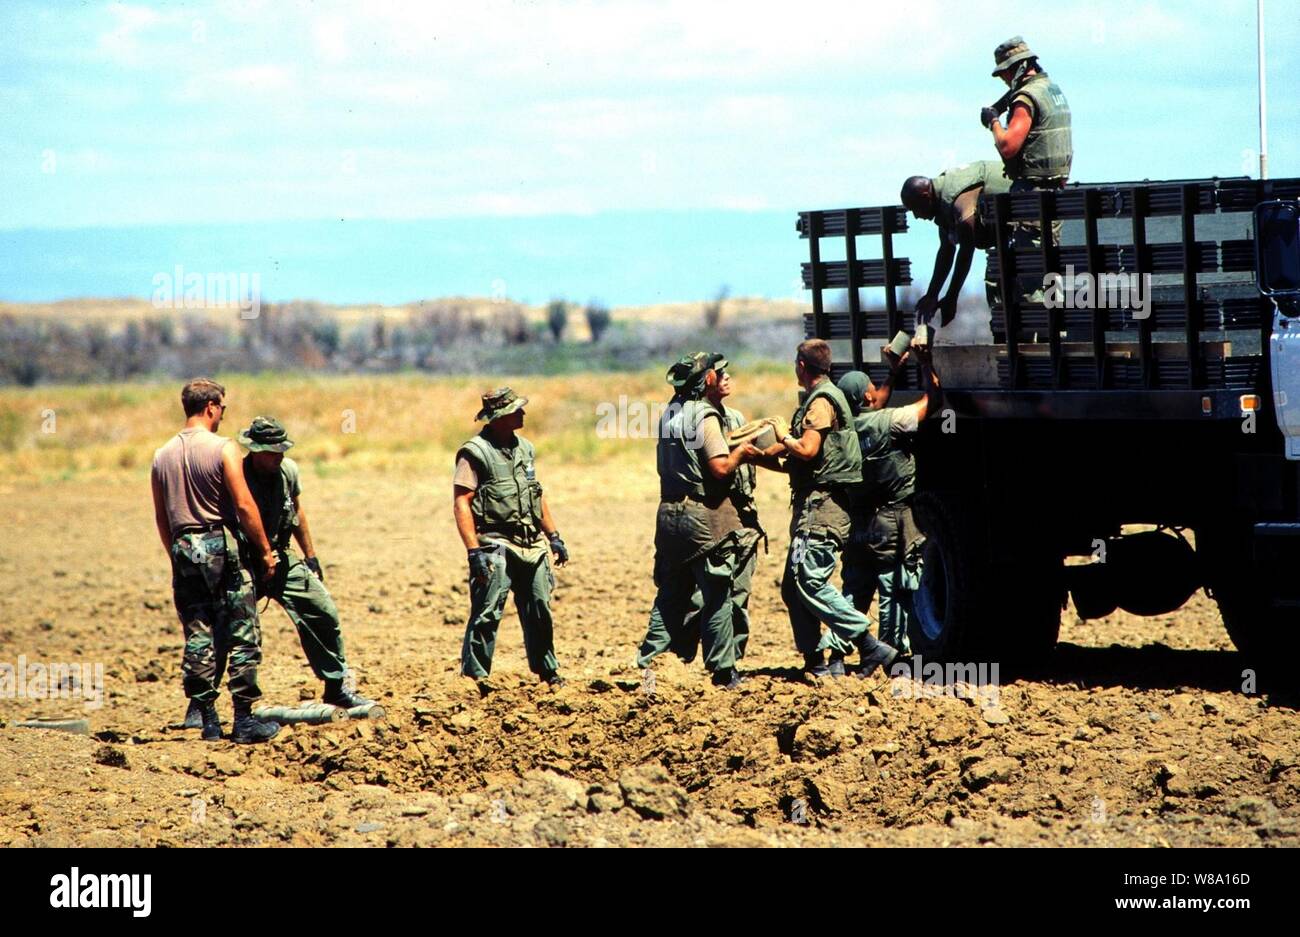 Marine Barracks Minefield Maintenance personnel unload deactivated anti-tank and anti-personnel land mines for destruction at a demolition site on Naval Station Guantanamo Bay, Cuba, in this March 18, 1997, file photo.  Anti-personnel and anti-tank land mines on the U.S. side of the fence separating Communist Cuba and the U.S. Naval Base at Guantanamo Bay are being removed in accordance with the Presidential Order of May 16, 1996.  Approximately 50,000 land mines were placed in the buffer zone between Communist Cuba and Guantanamo Bay beginning in 1961 as a result of the Cold War. The land min Stock Photo